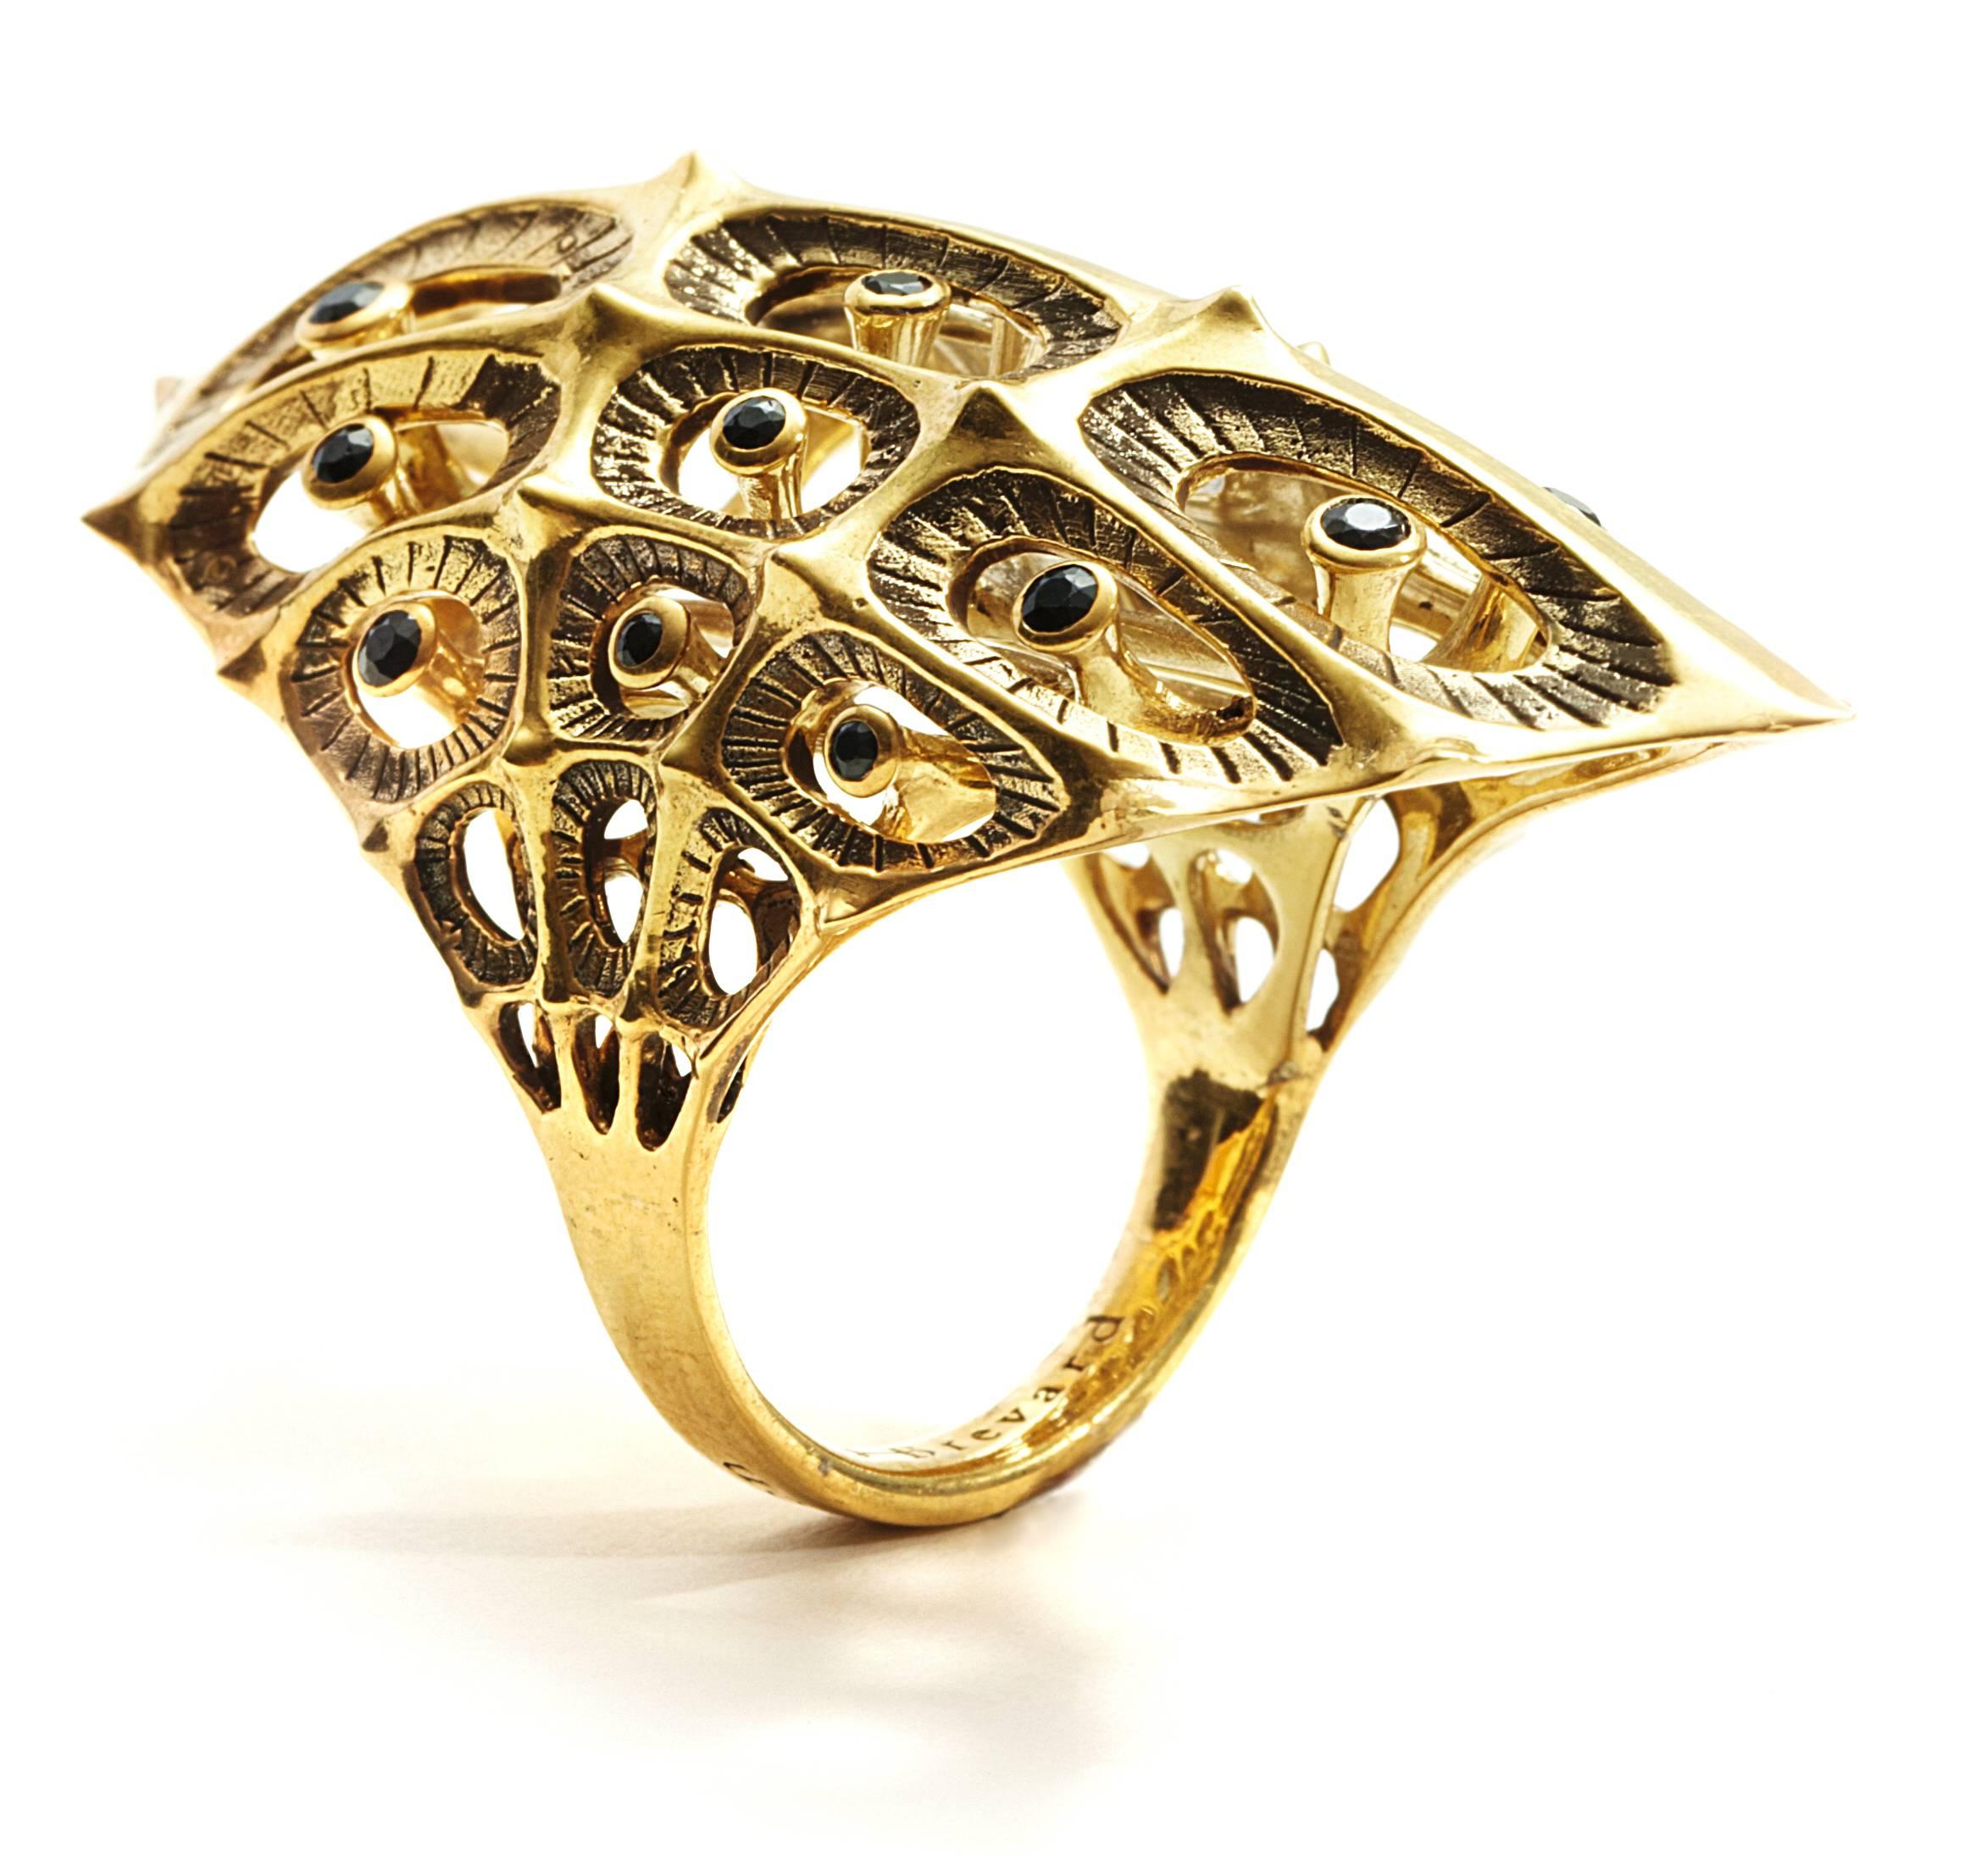 This unique Morpho Black Diamond and 18K Gold Ring is meant to evoke personal power. This limited edition piece is inspired by sacred geometries and patterns in nature. This sculptural ring is from designer John Brevard’s Morphogen series. The